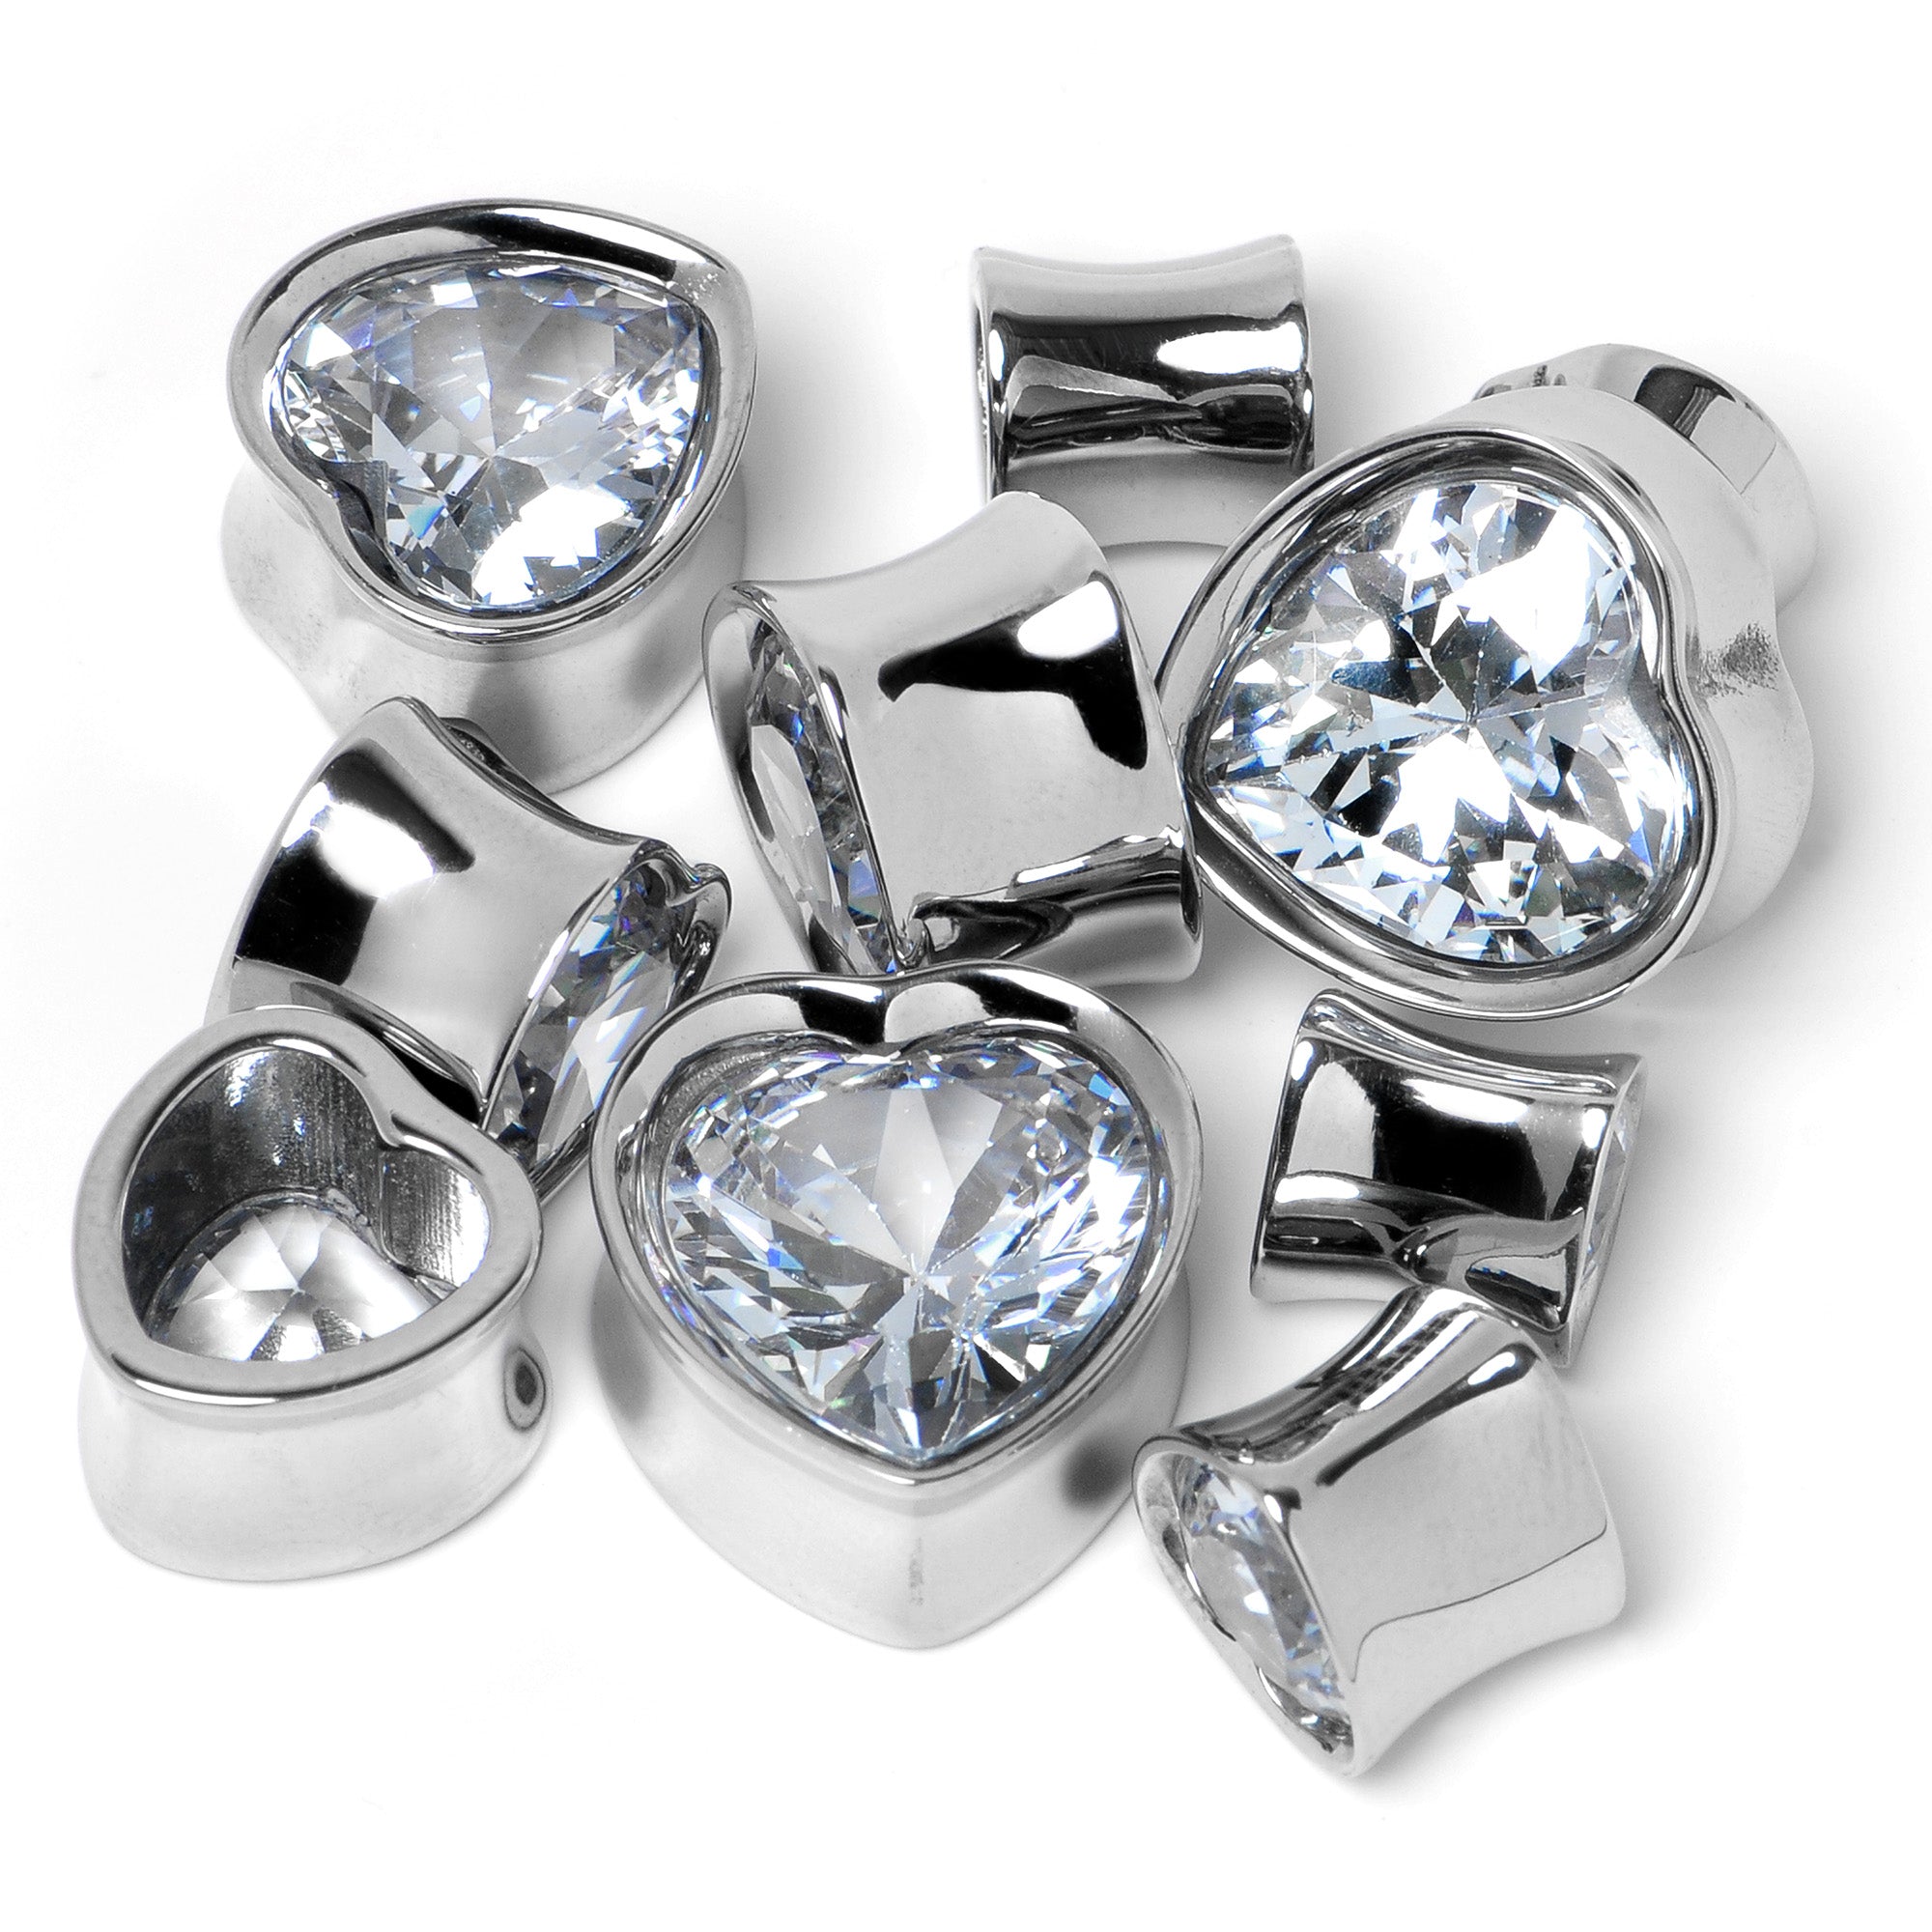 Stainless Steel CZ Gem Heart In Heart Double Flare Plug Set 8mm to 16mm